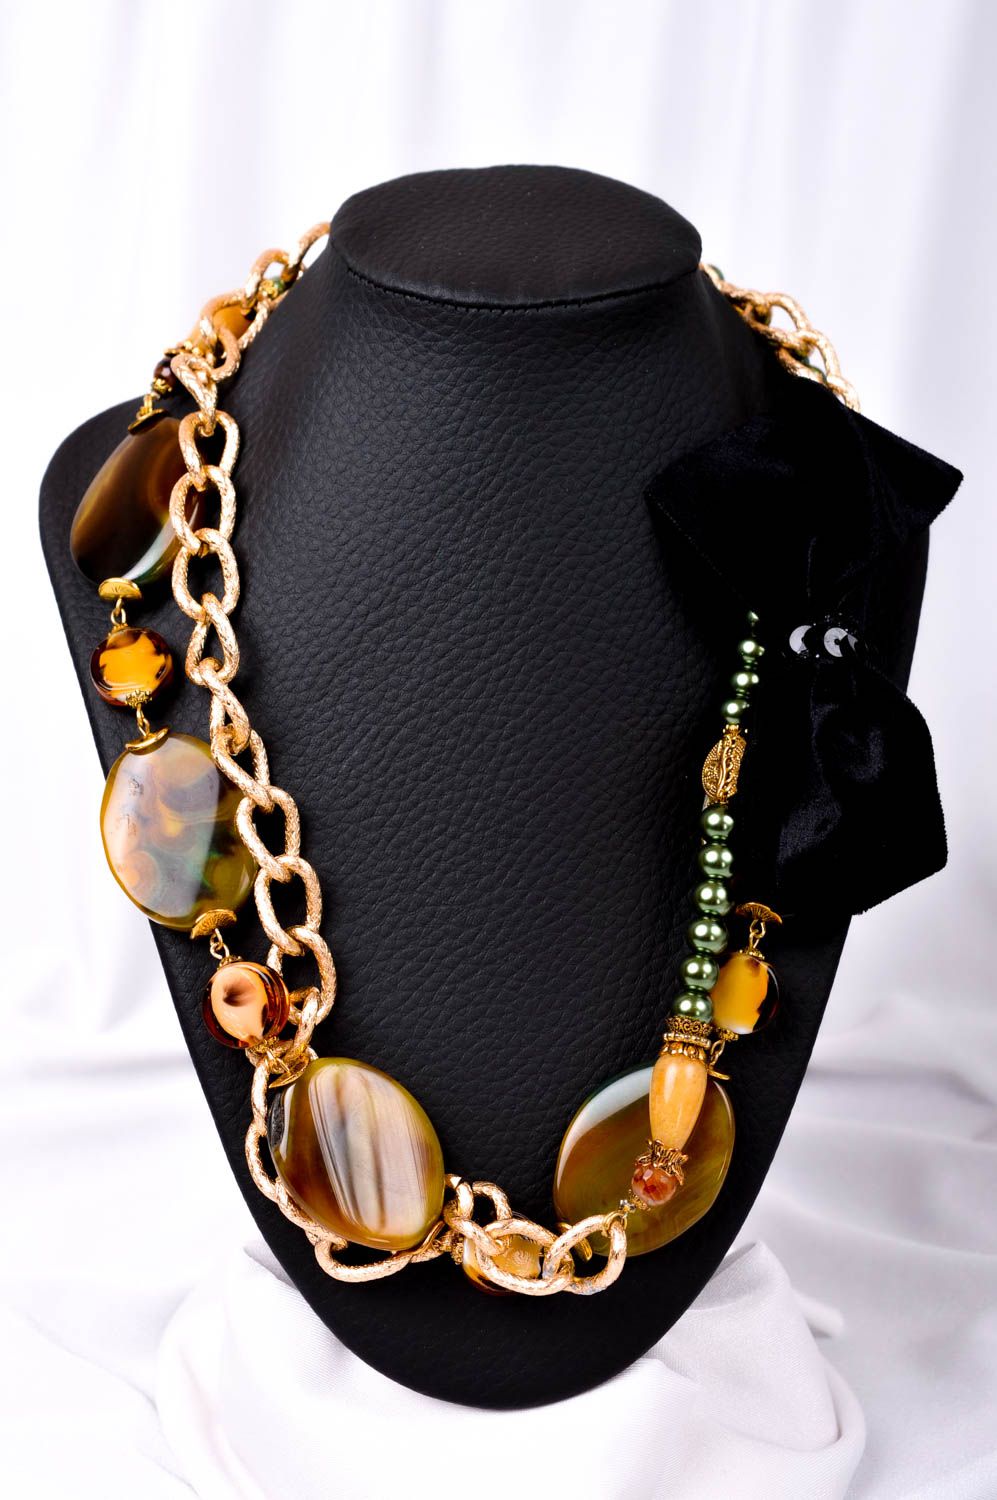 Handmade necklace designer necklace with stones unusual gift for women photo 1